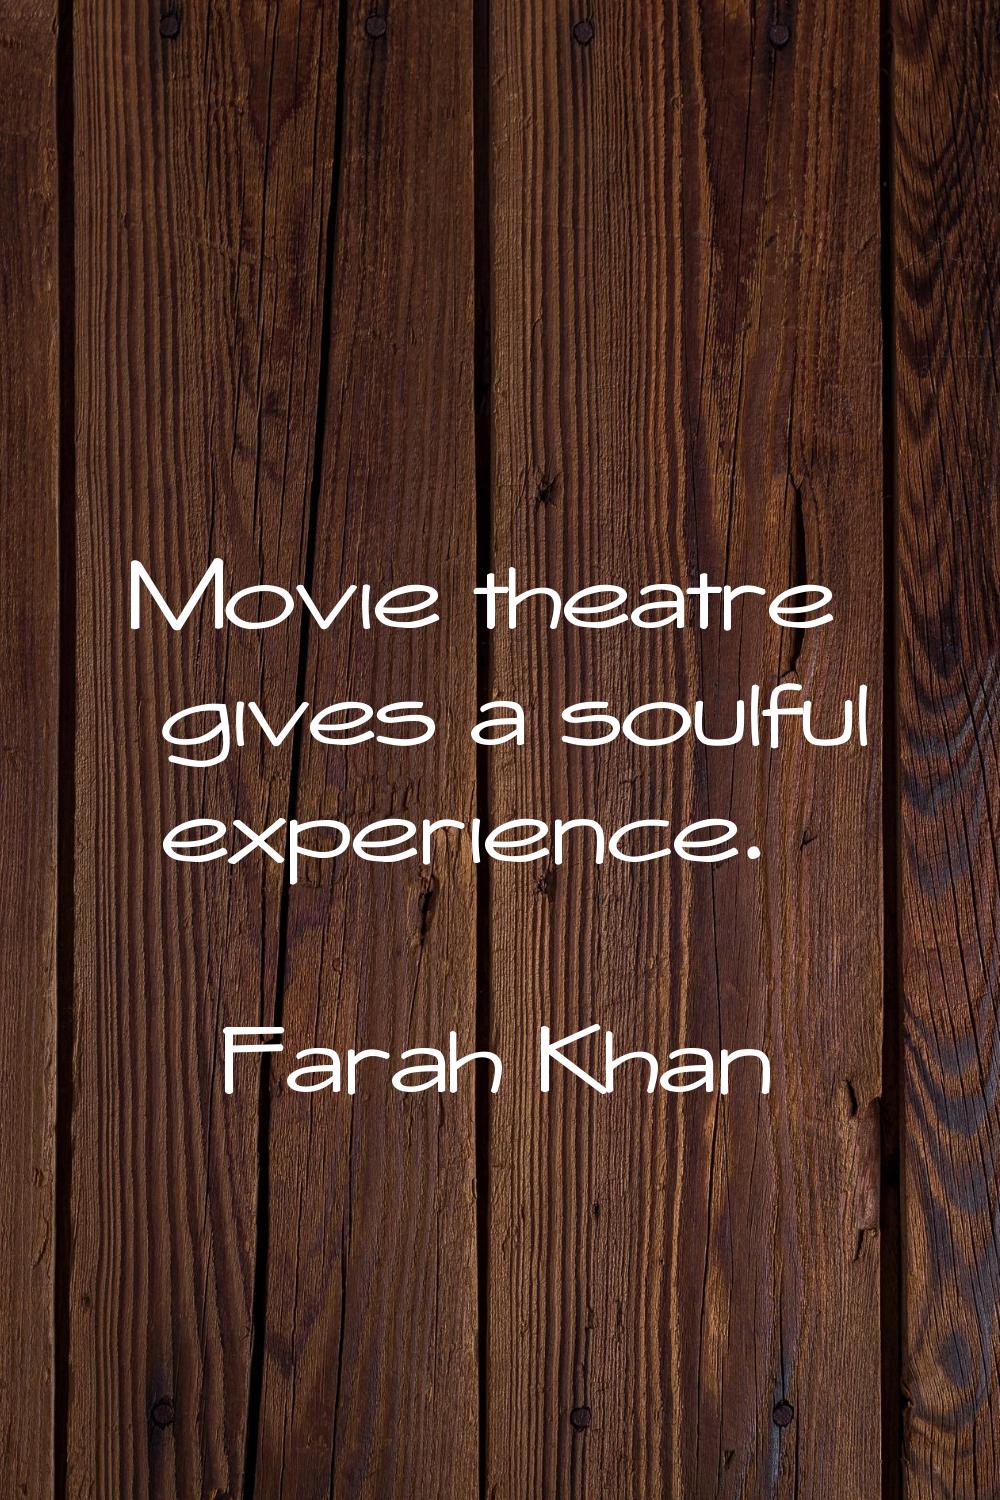 Movie theatre gives a soulful experience.